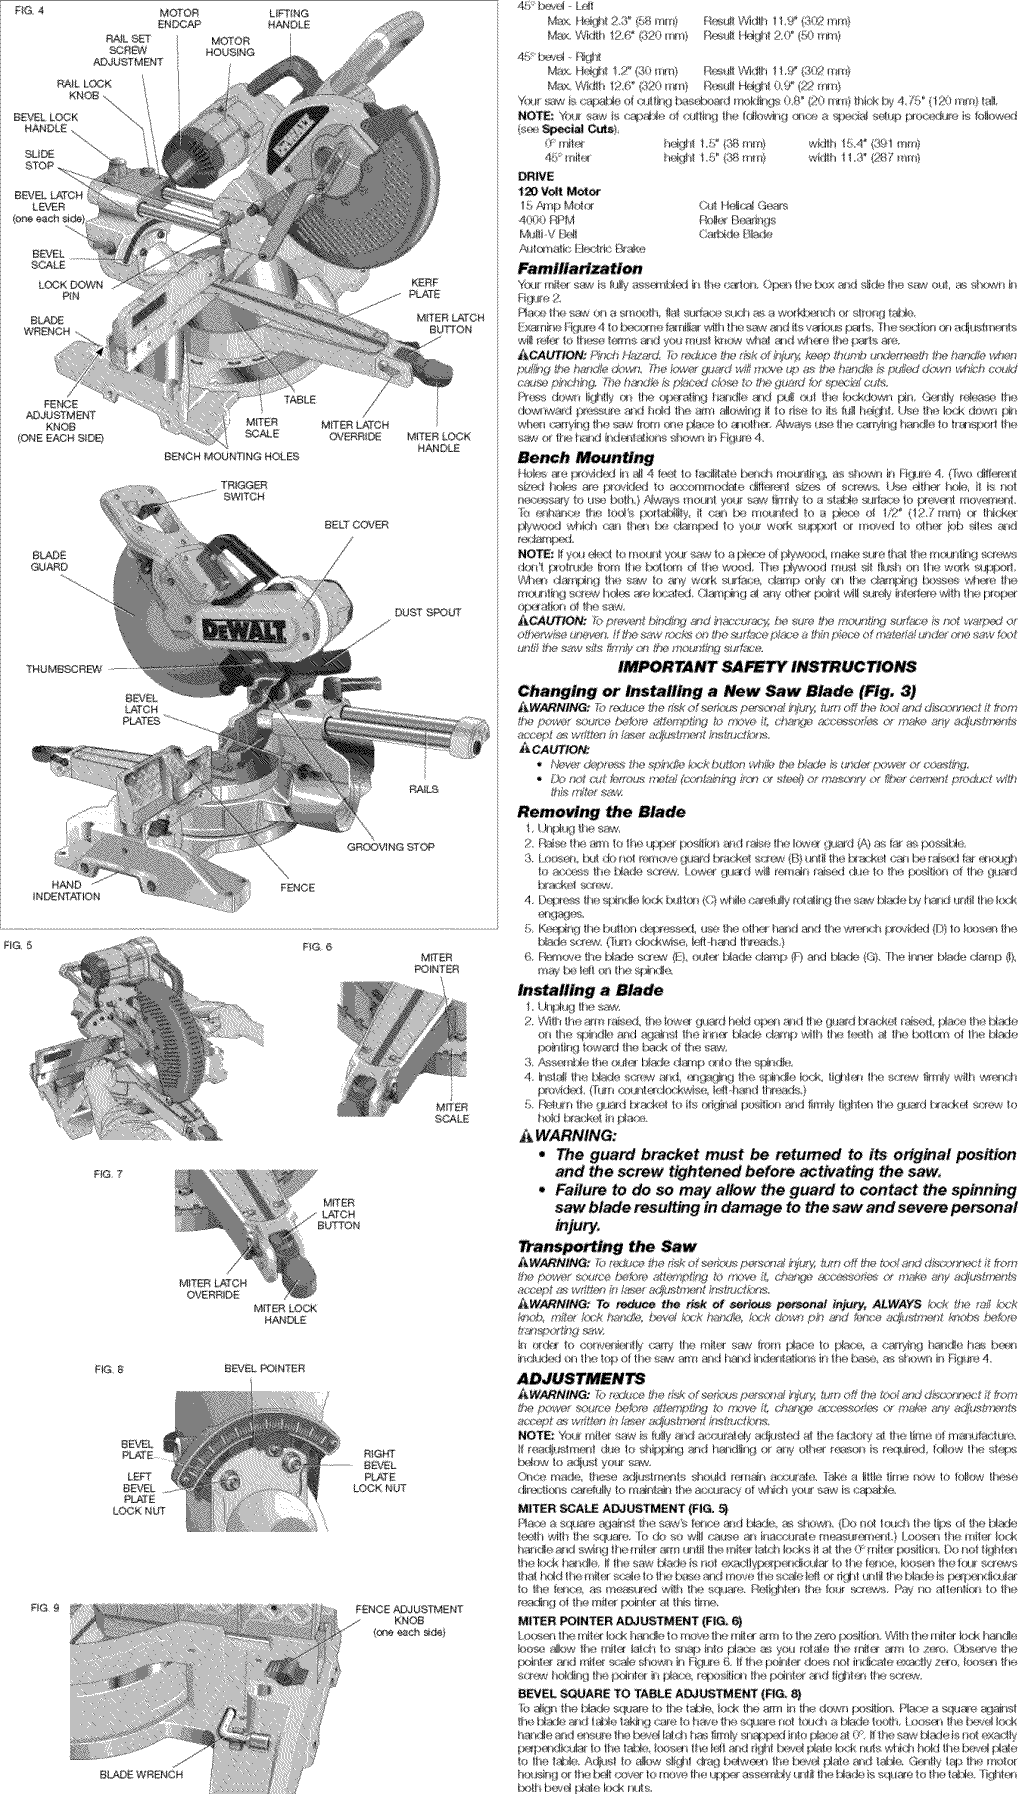 Page 3 of 7 - Dewalt DW717 TYPE2 User Manual  MITER SAW - Manuals And Guides 1301456L